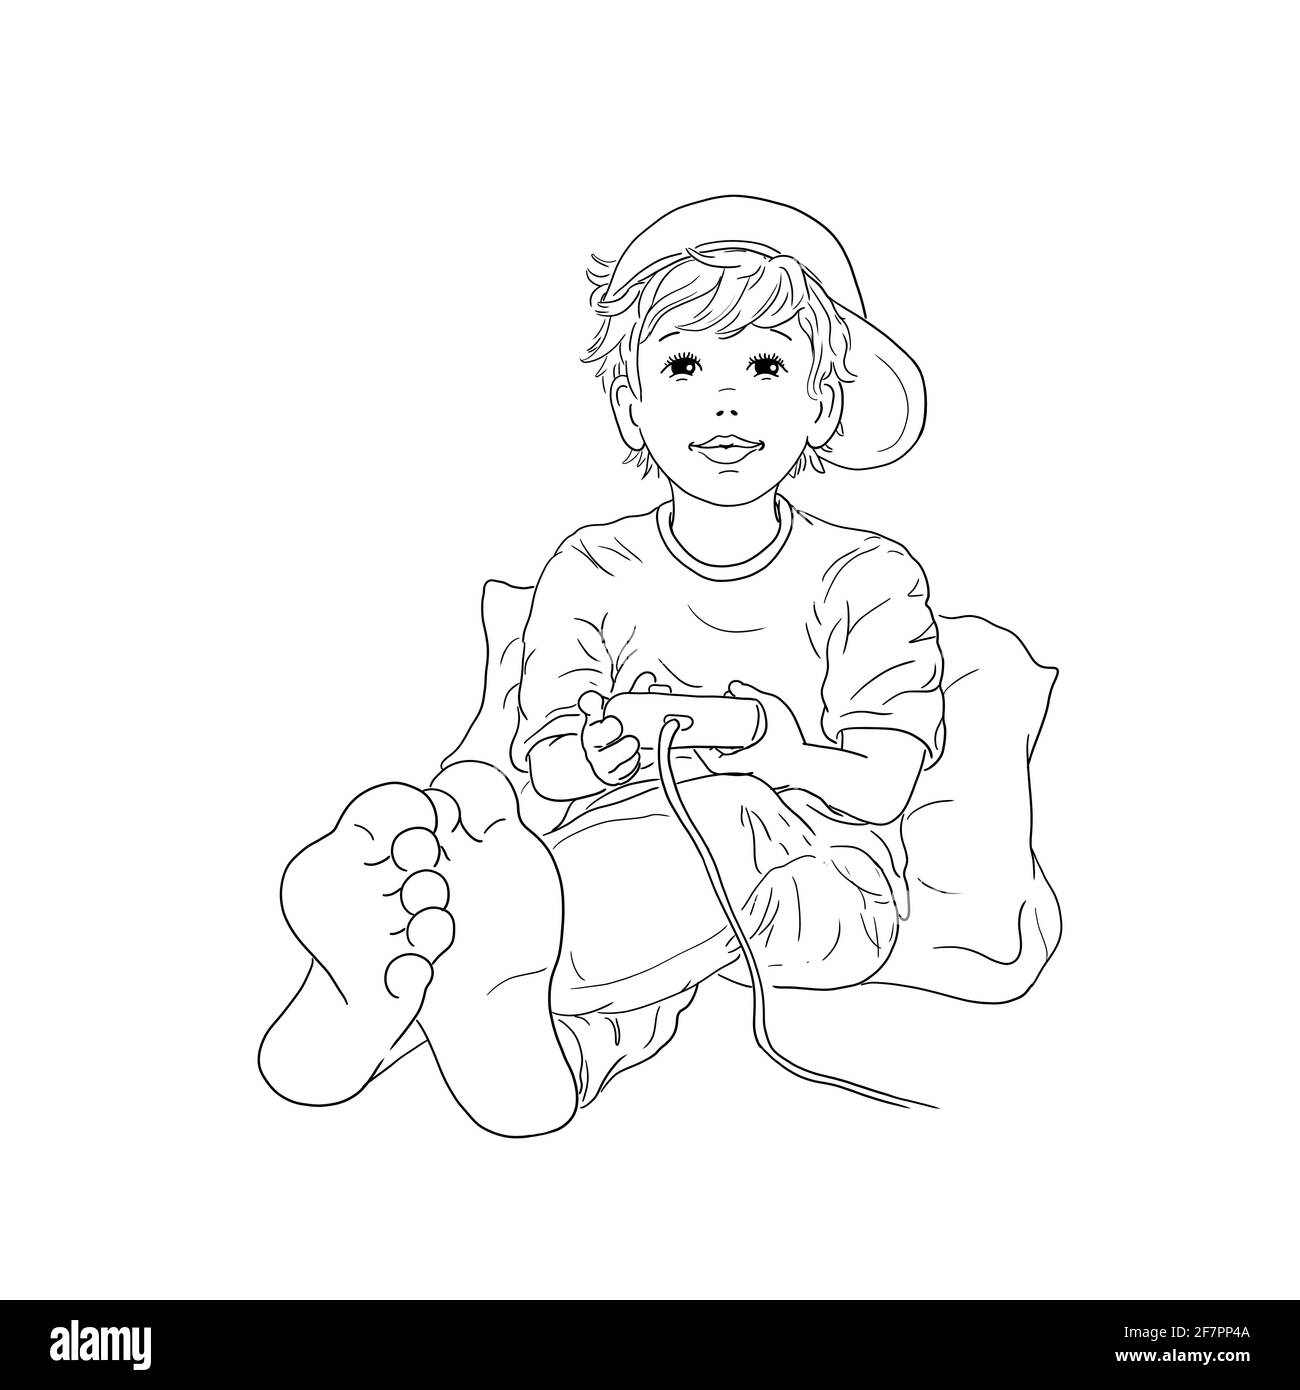 Boy sitting barefoot leaning against pillow with hat baseball cap on his head and playing computer game console play leisure hobby teenager pupil chil Stock Photo